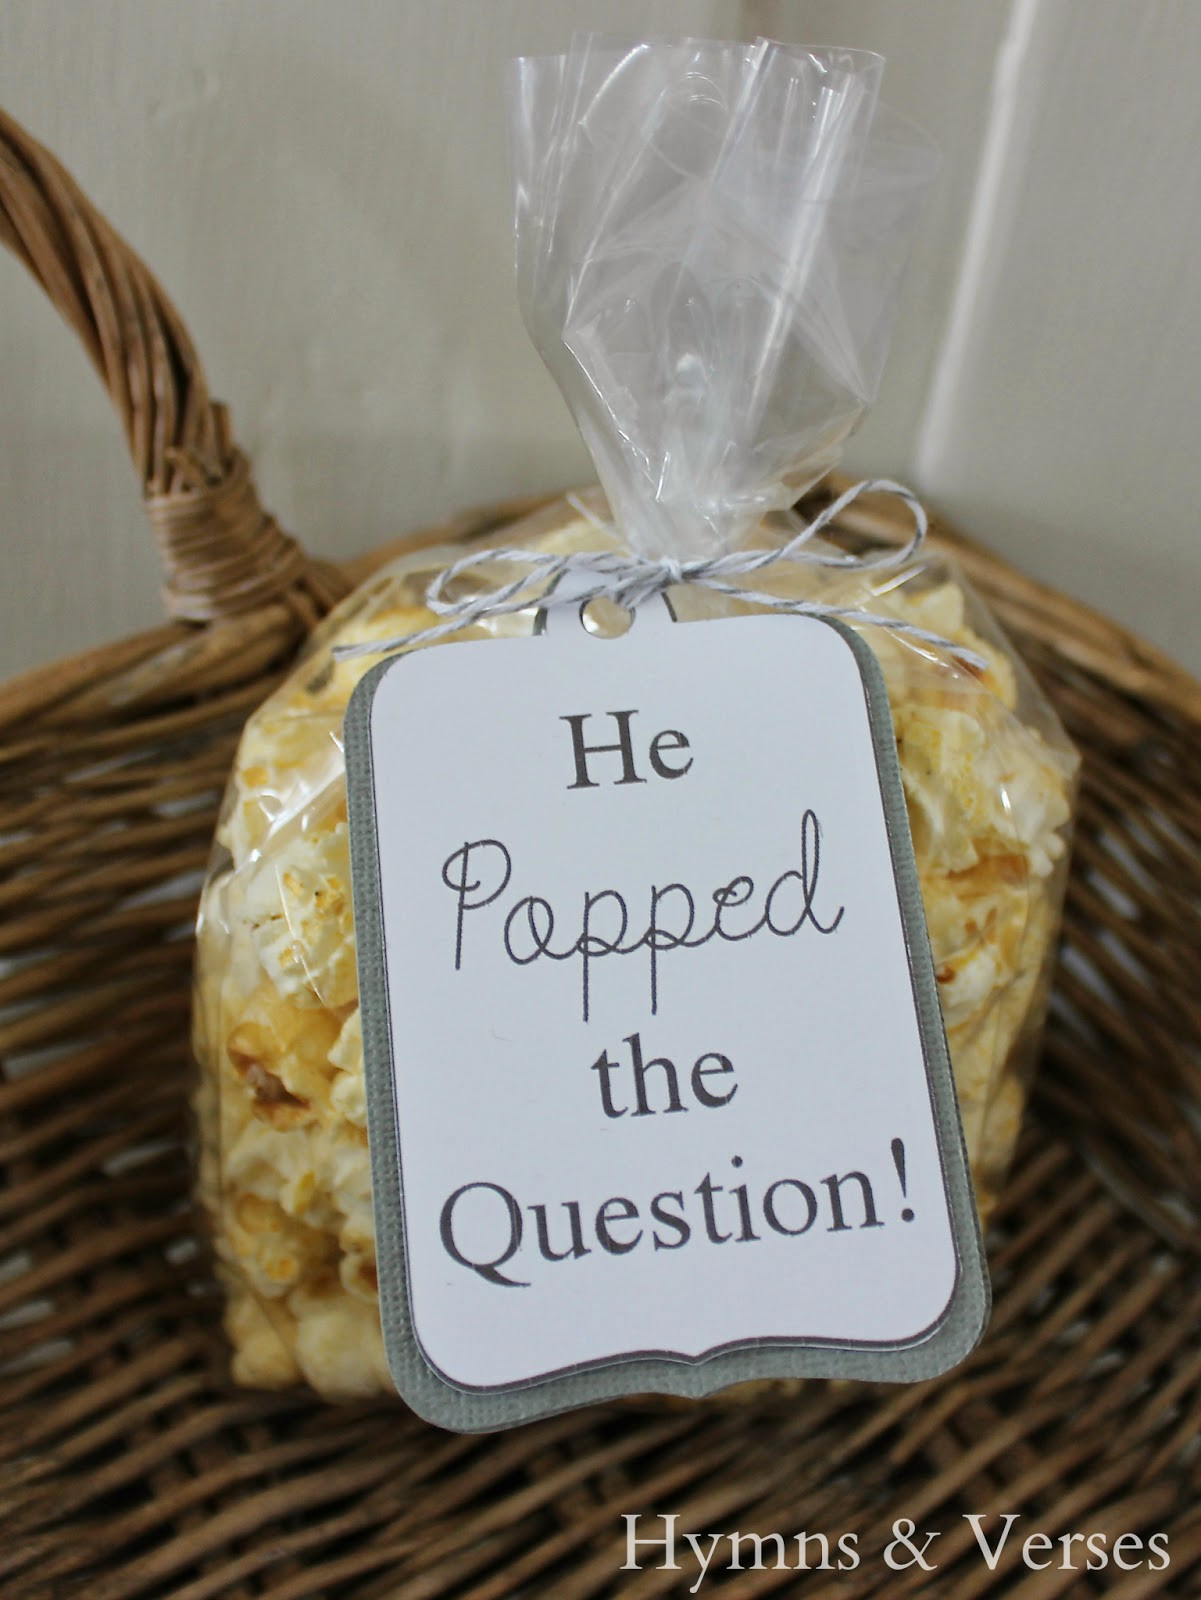 Engagement Party Gift Ideas
 Hymns and Verses Engagement Party and He Popped the